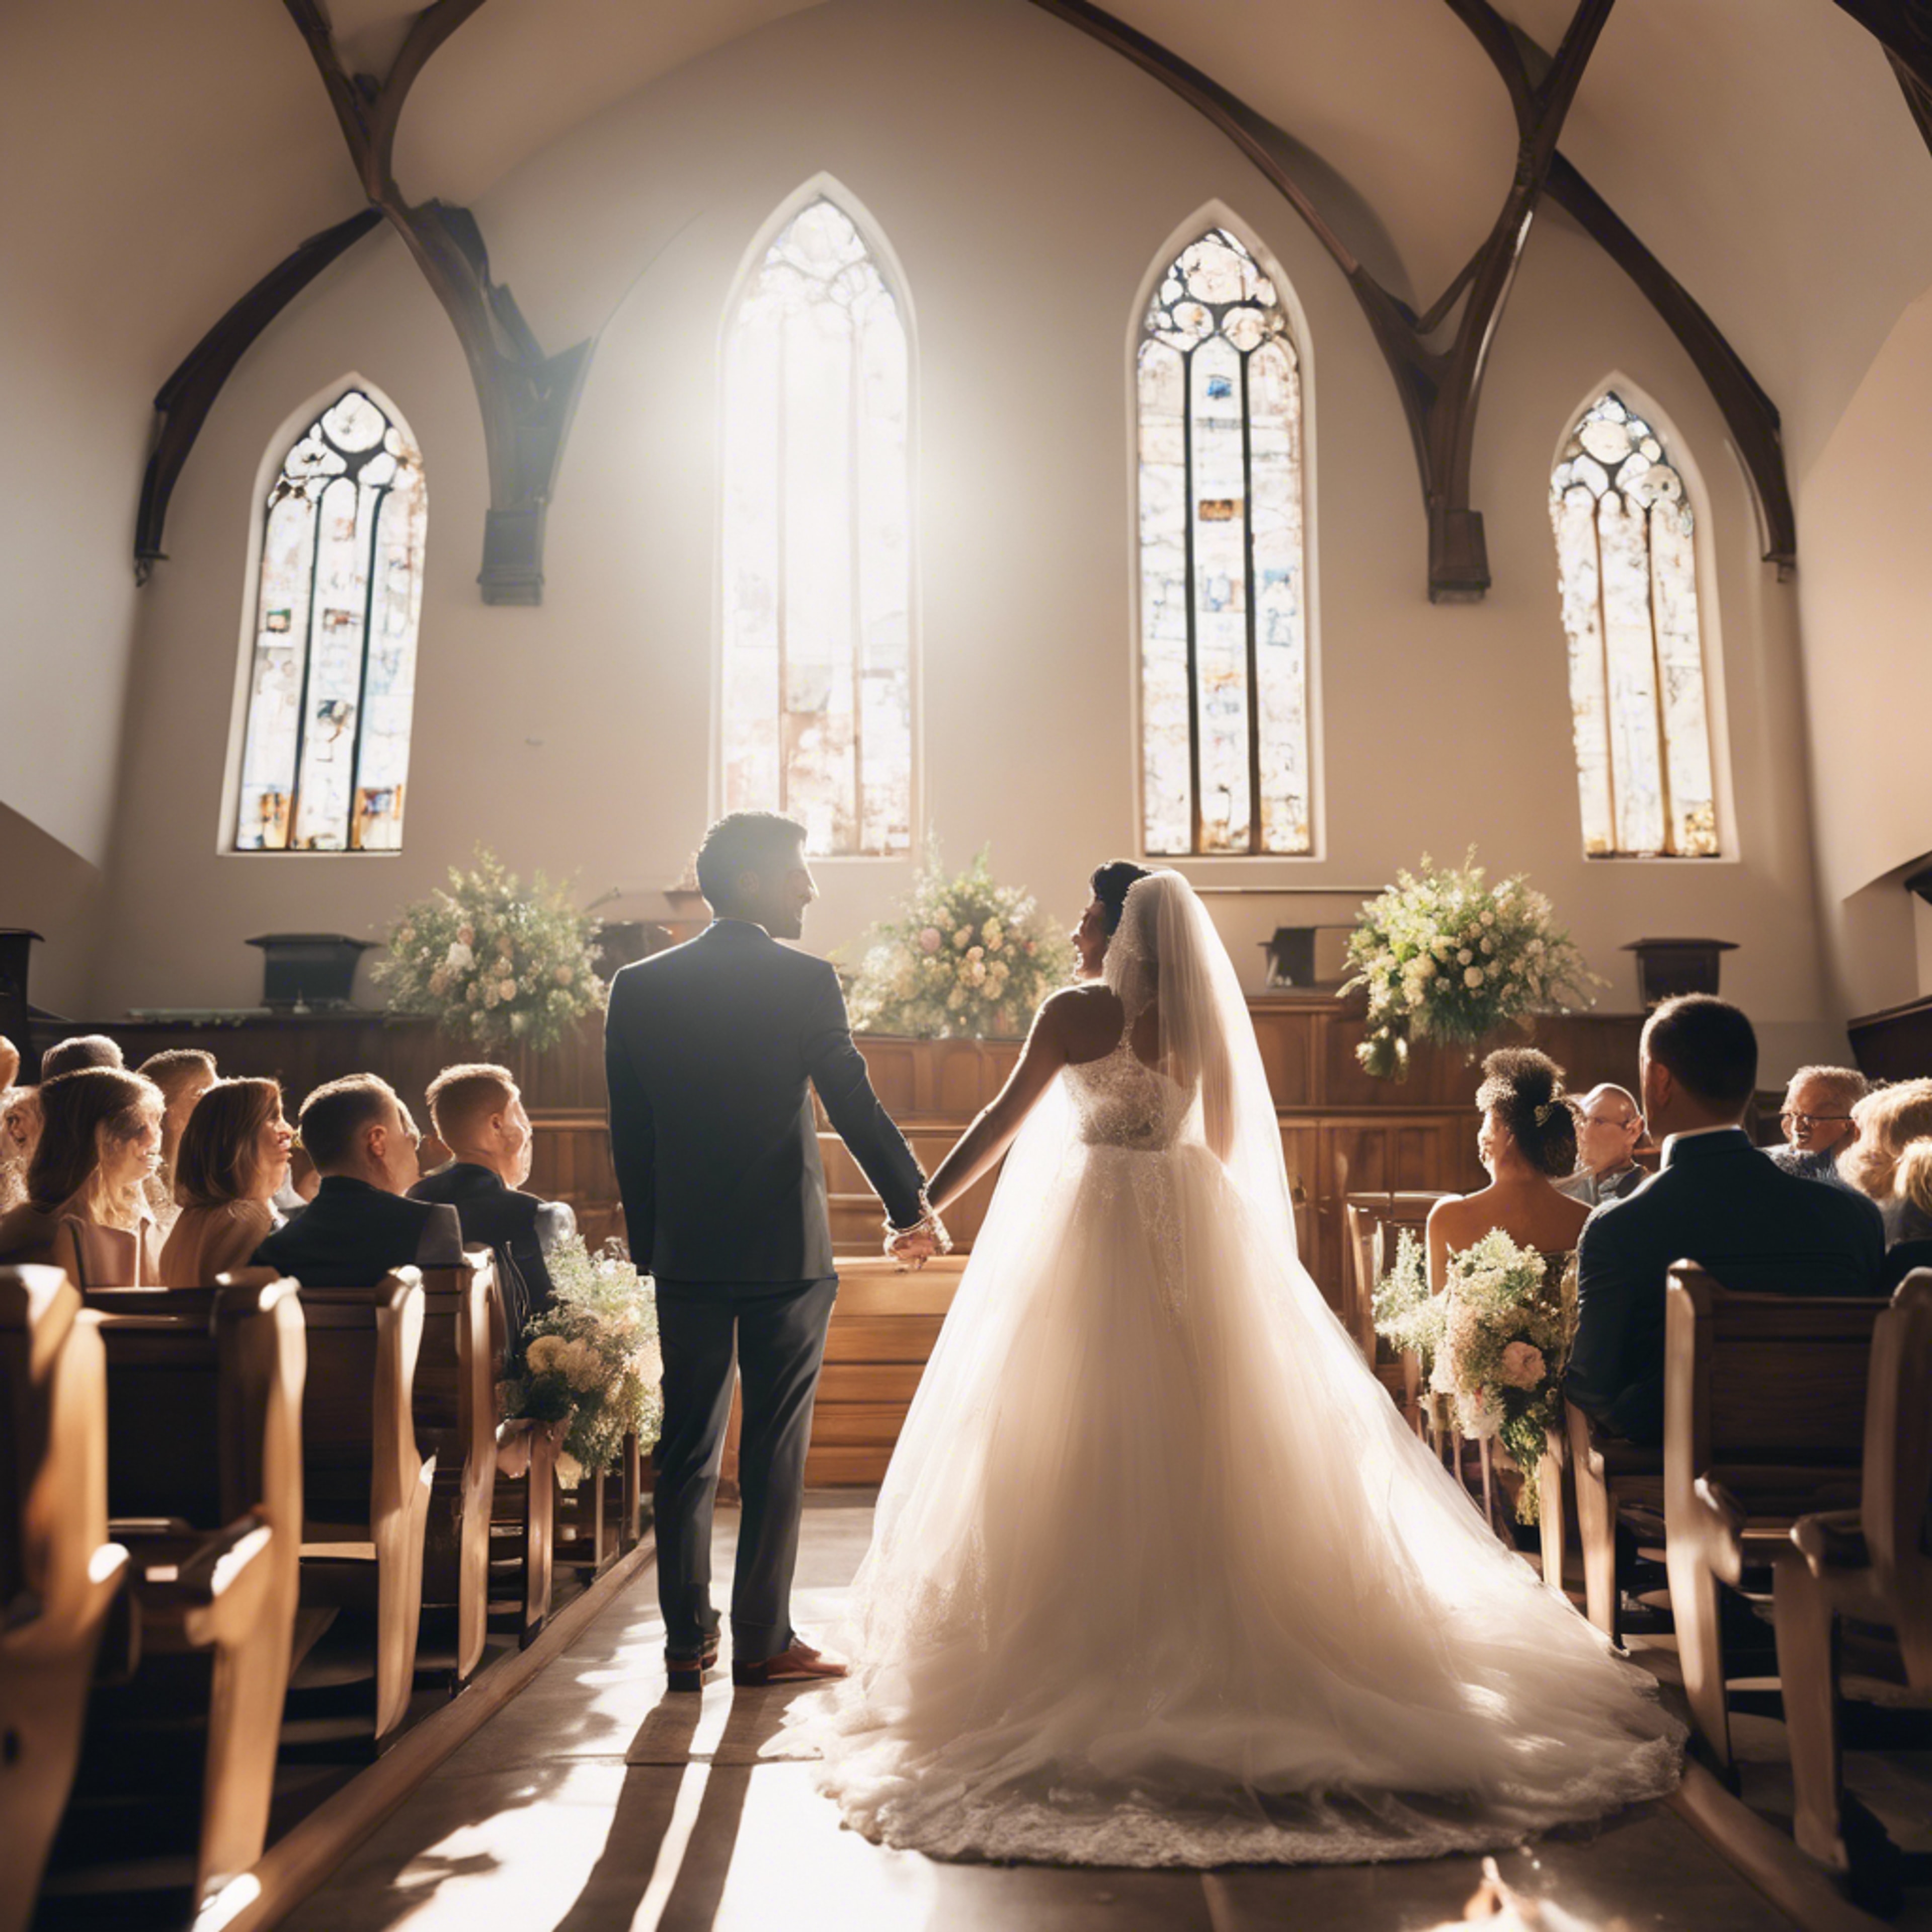 A happy couple getting married in a sunlit church, filled with joy and love. วอลล์เปเปอร์[c91a19bd1c8e4c9b9bbb]